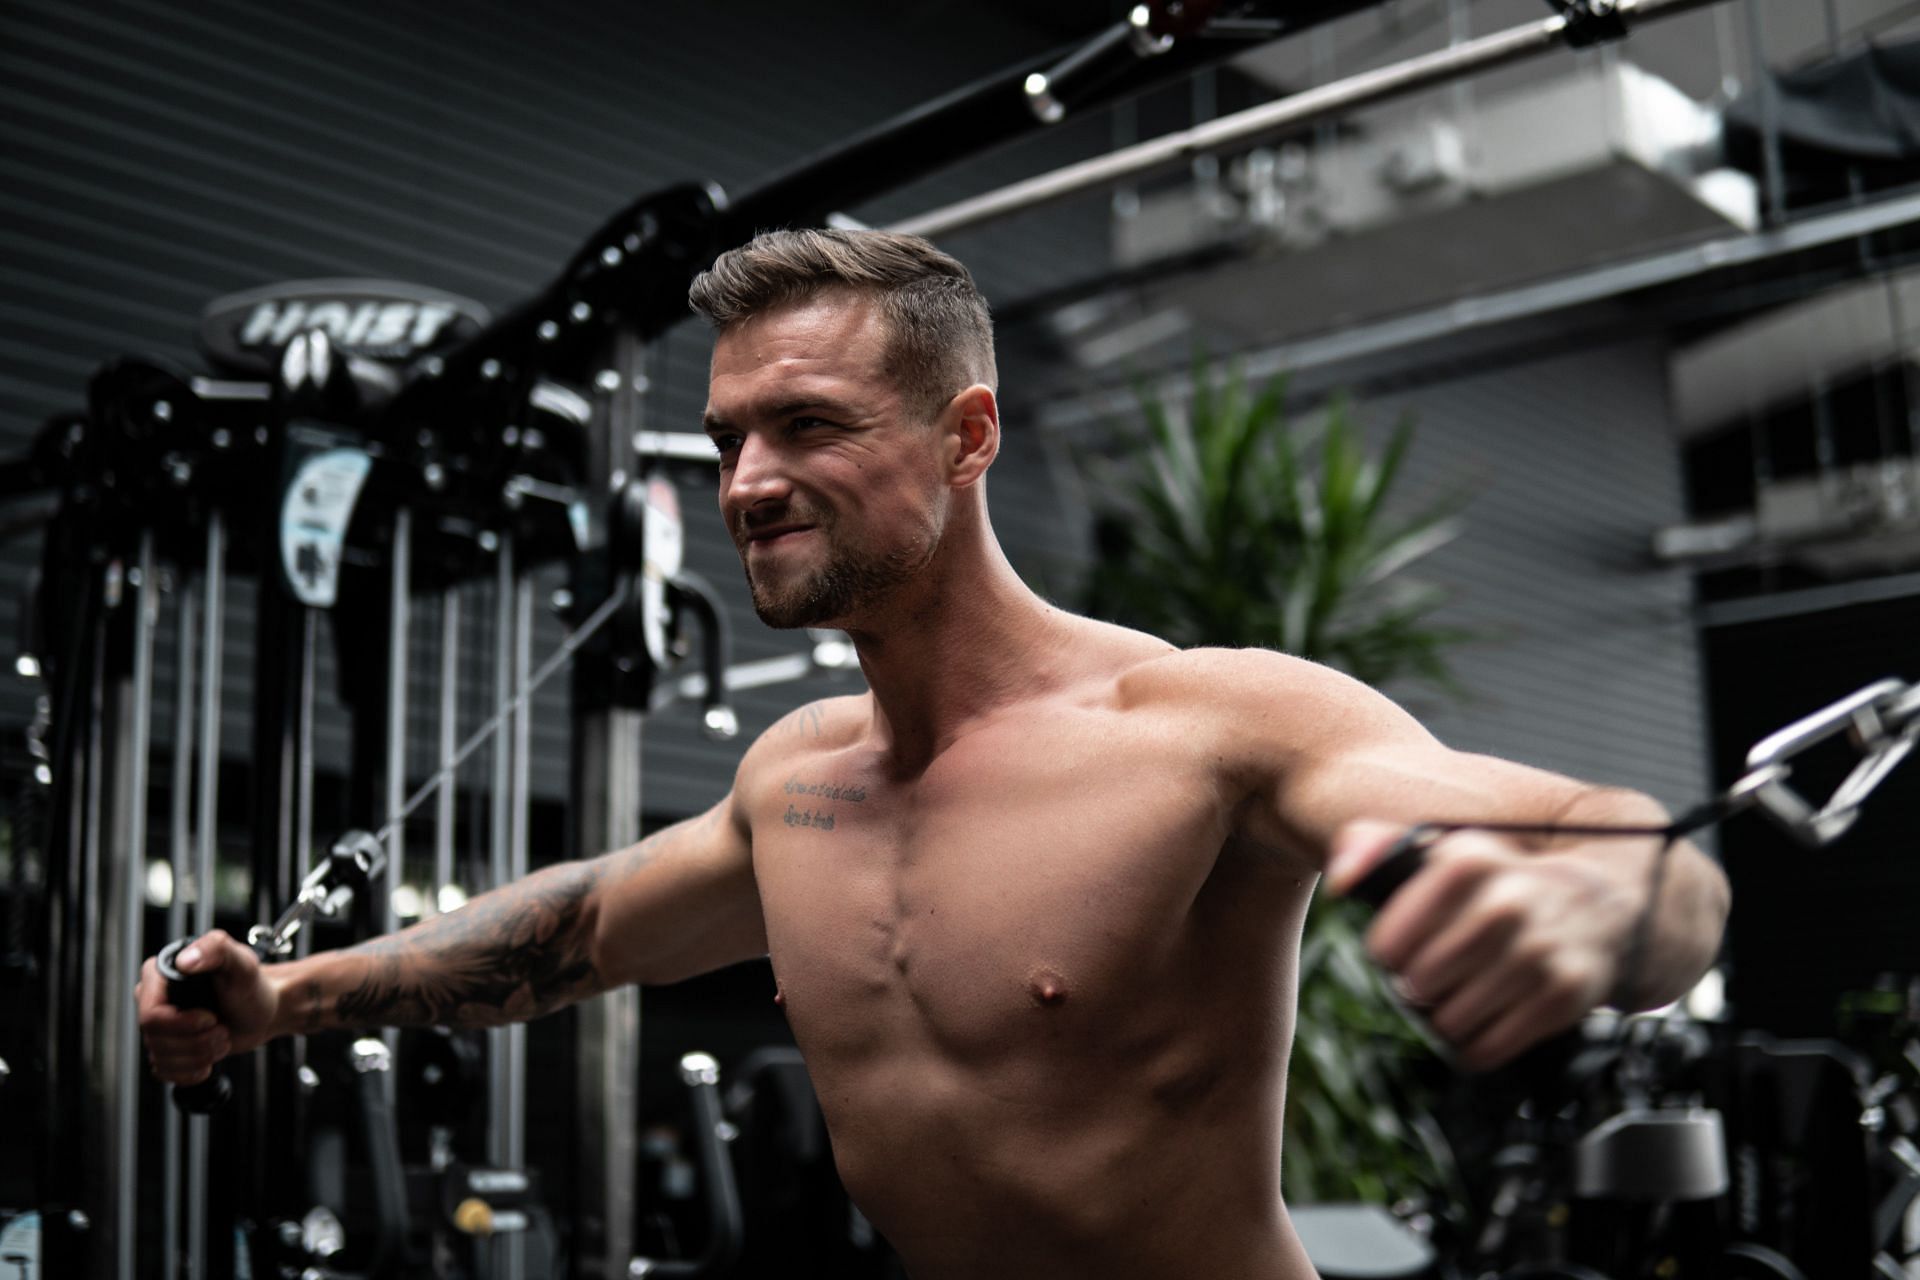 Cable lateral raise are one of the best shoulder exercises. (Image via Unsplash/ Milan Csizmadia)